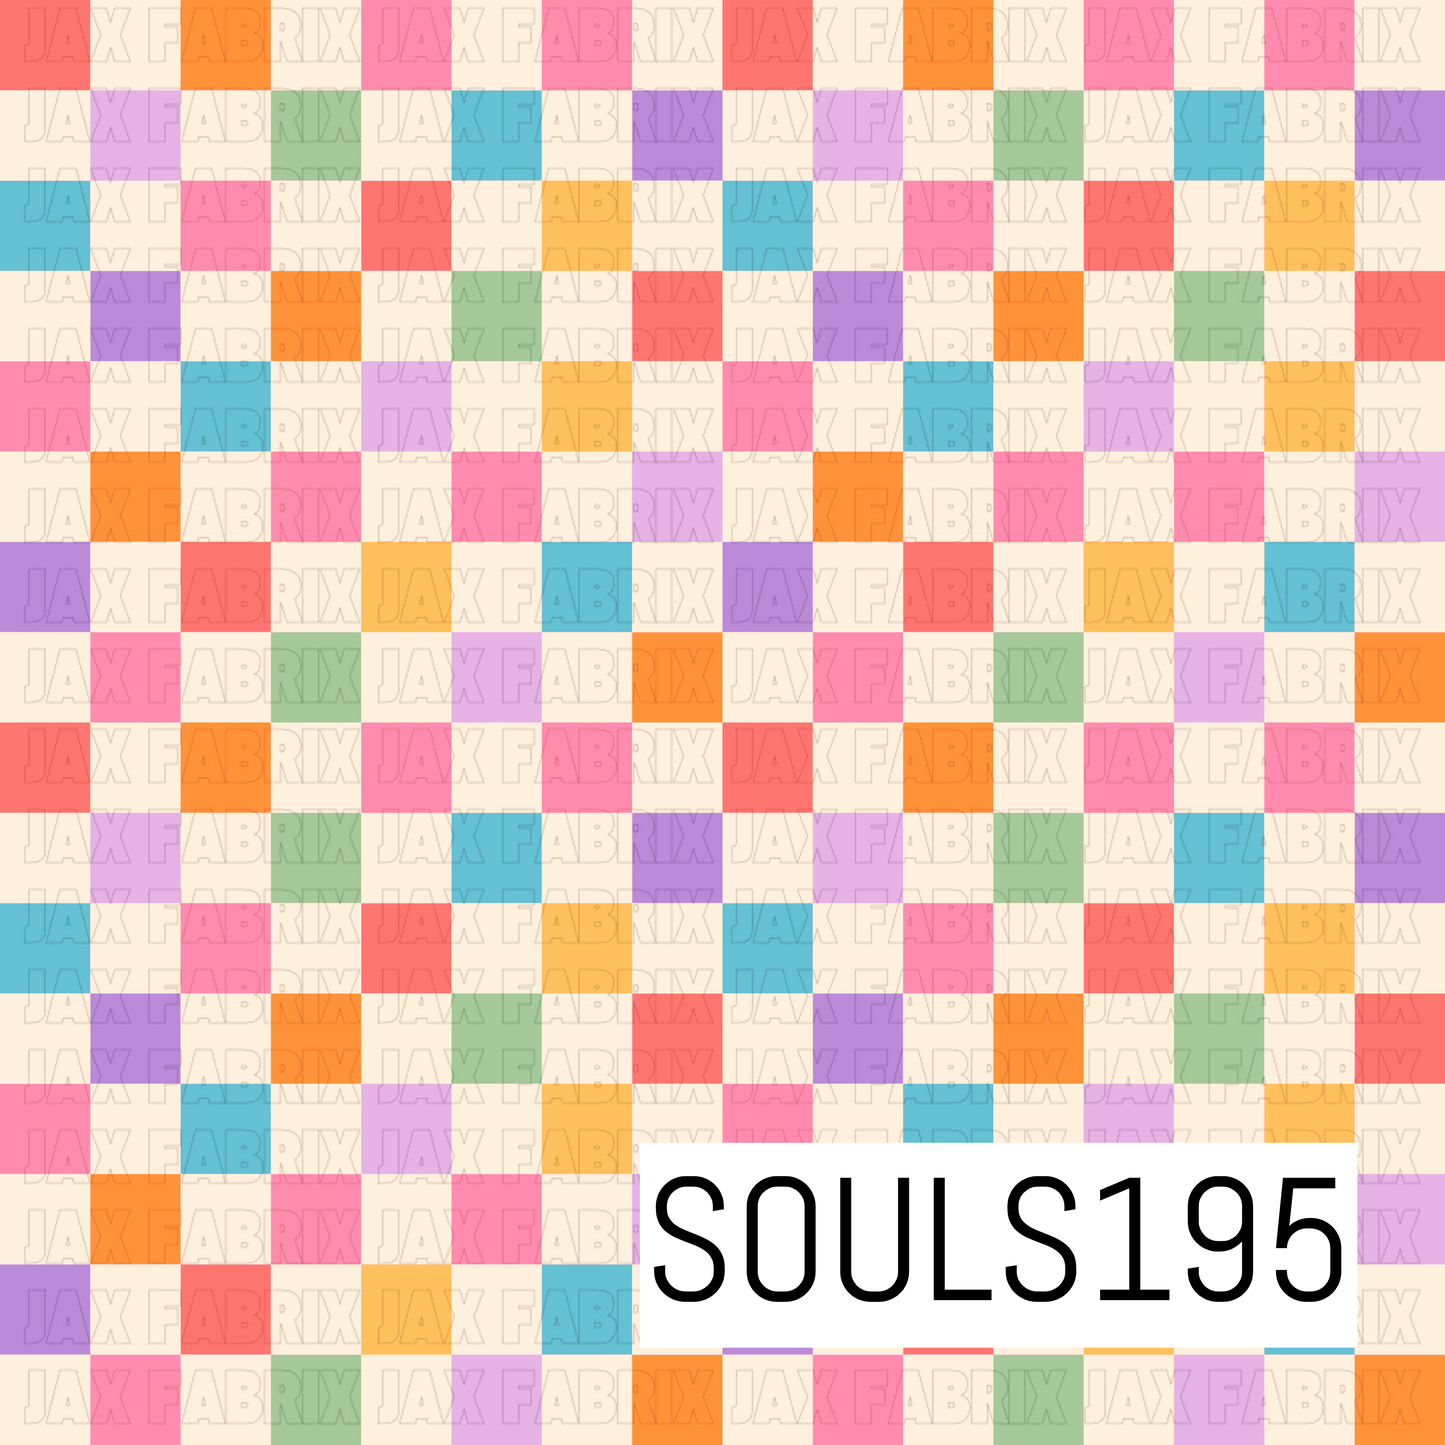 Rainbow Butterfly Check SOULS195